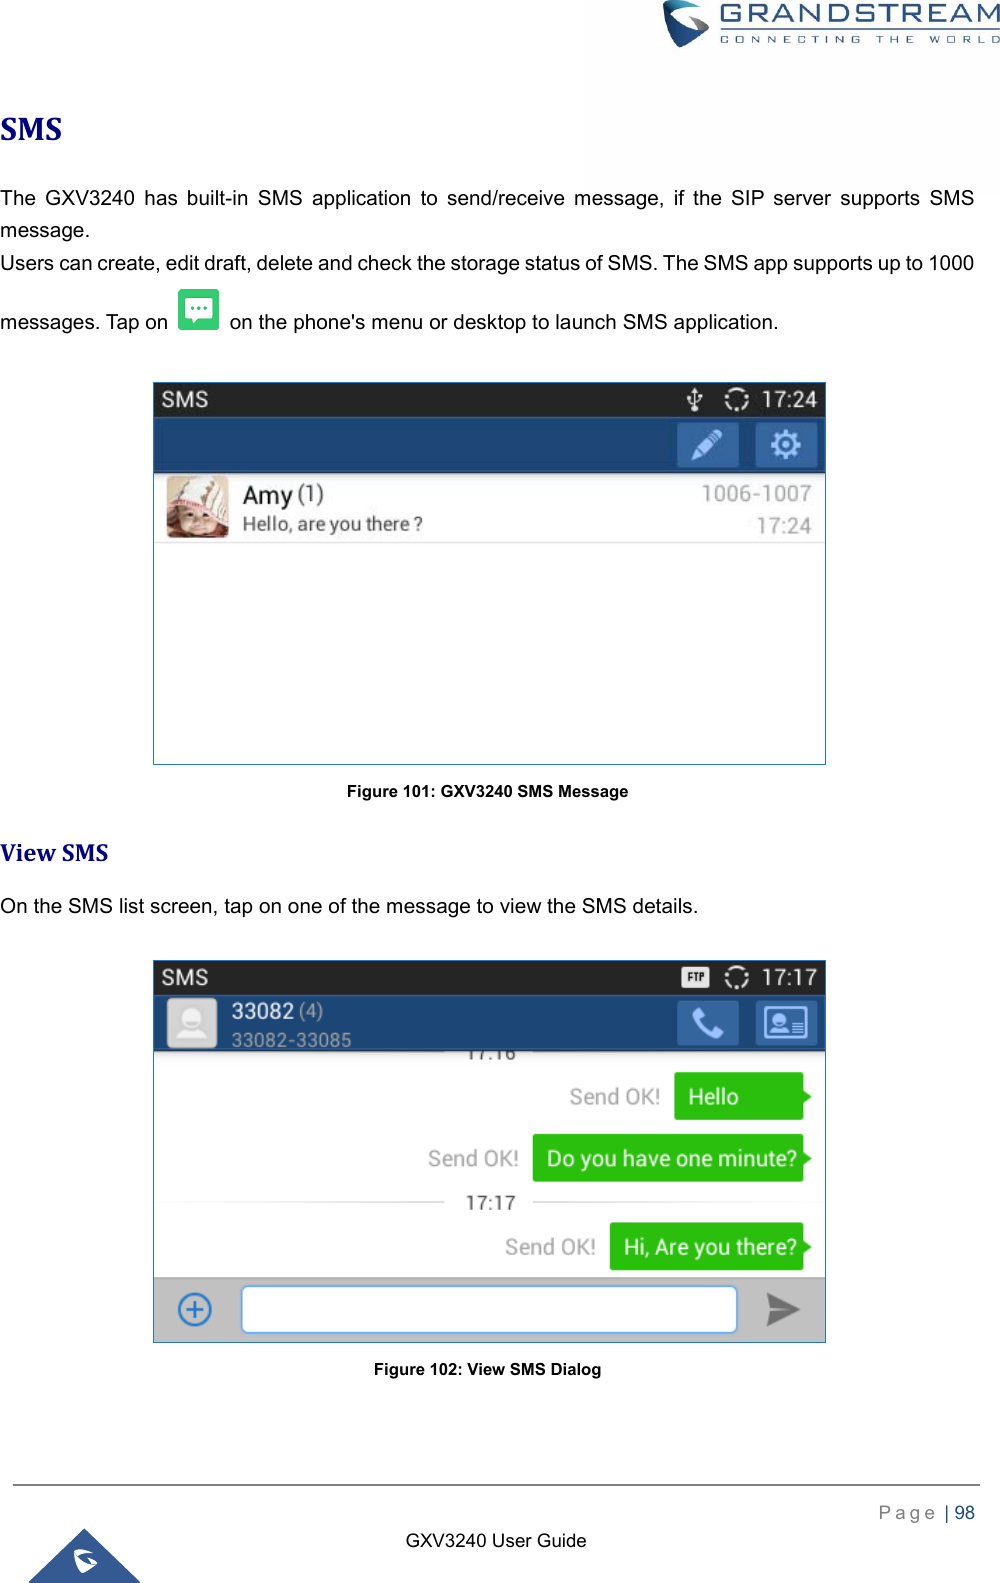    P a g e  | 98    GXV3240 User Guide  SMS The  GXV3240  has  built-in  SMS  application  to  send/receive  message,  if  the  SIP  server  supports  SMS message. Users can create, edit draft, delete and check the storage status of SMS. The SMS app supports up to 1000 messages. Tap on    on the phone&apos;s menu or desktop to launch SMS application.   Figure 101: GXV3240 SMS Message View SMS On the SMS list screen, tap on one of the message to view the SMS details.   Figure 102: View SMS Dialog 